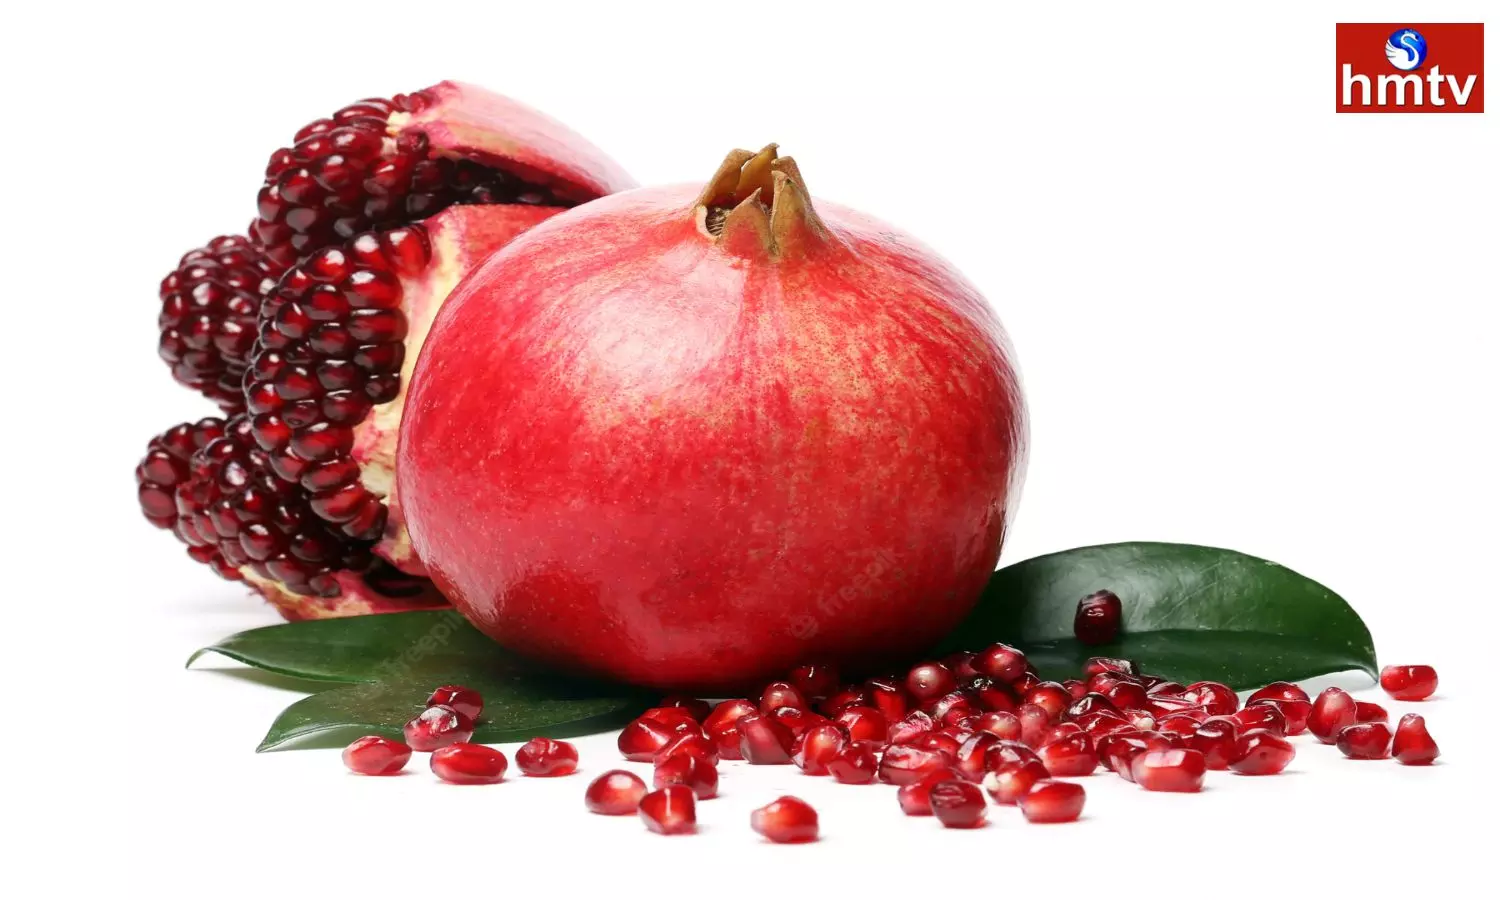 Pomegranate is not only good for health but also good for skin use it in the right way